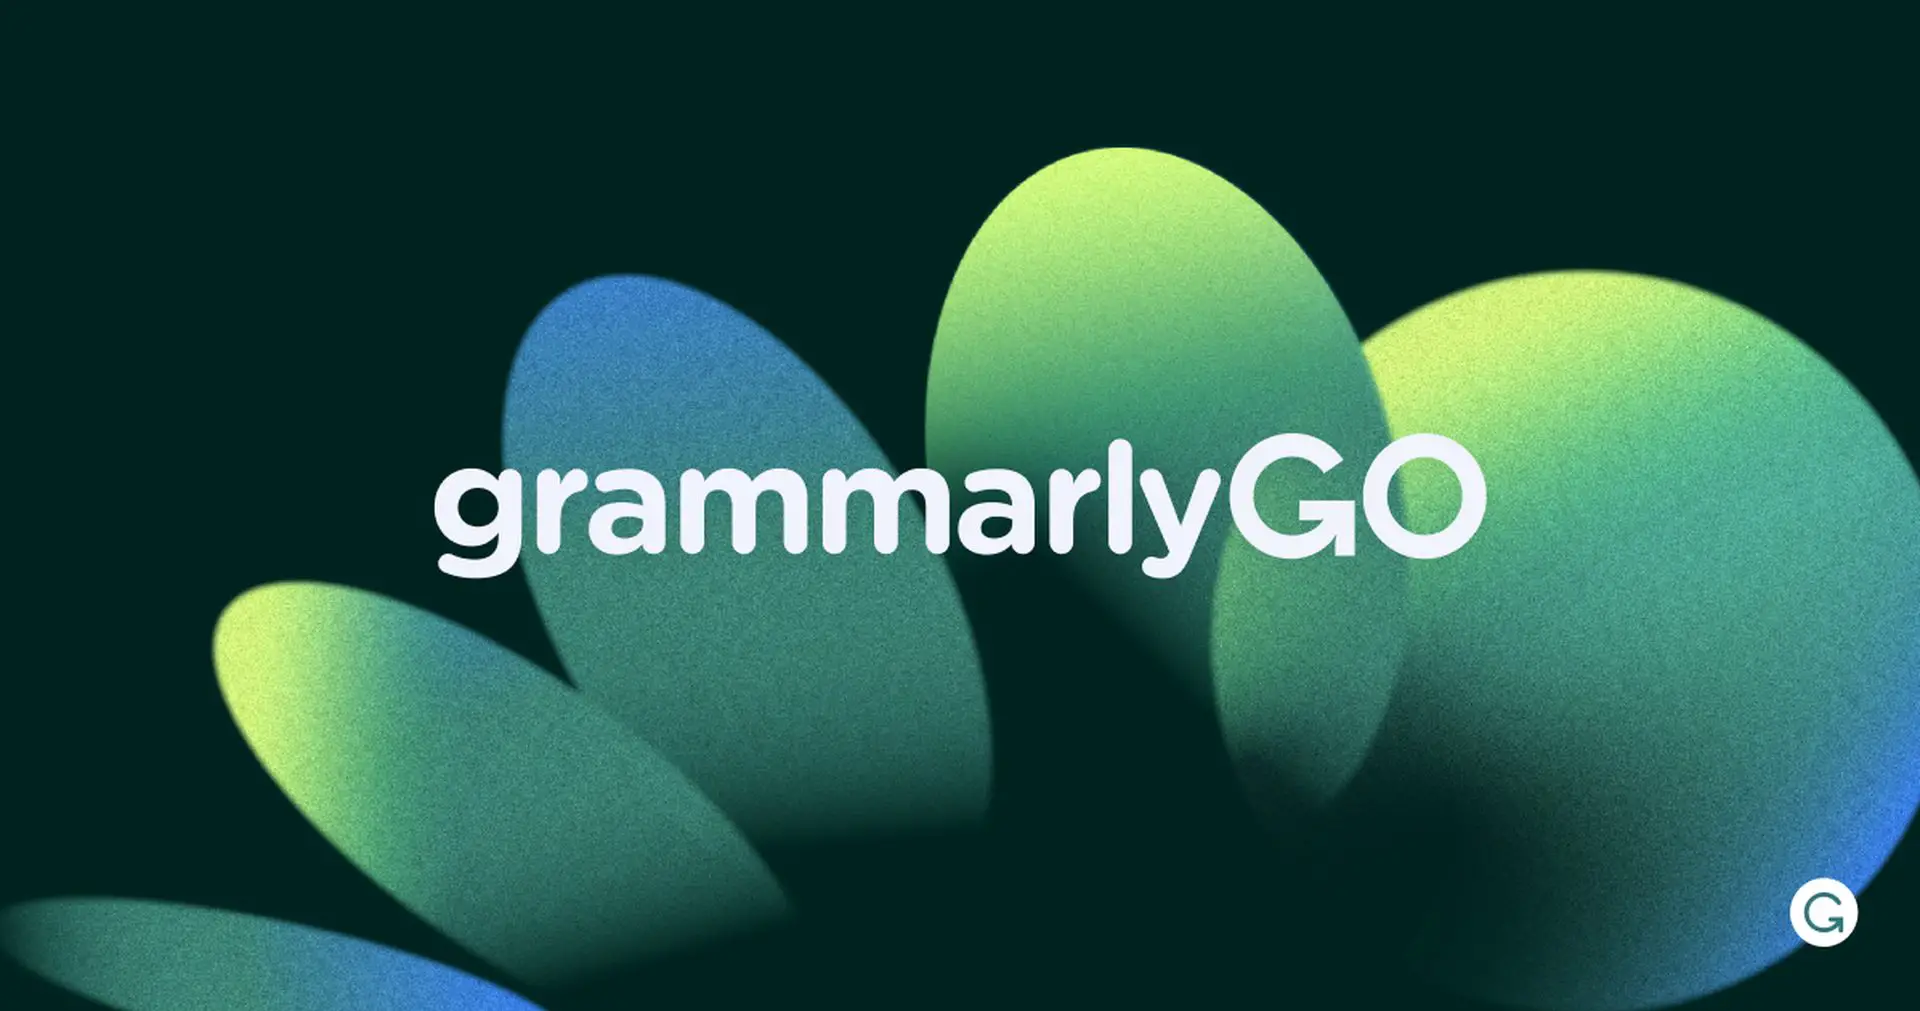 Grammarly releases a new AI writing assistant, GrammarlyGo, inspired by ChatGPT